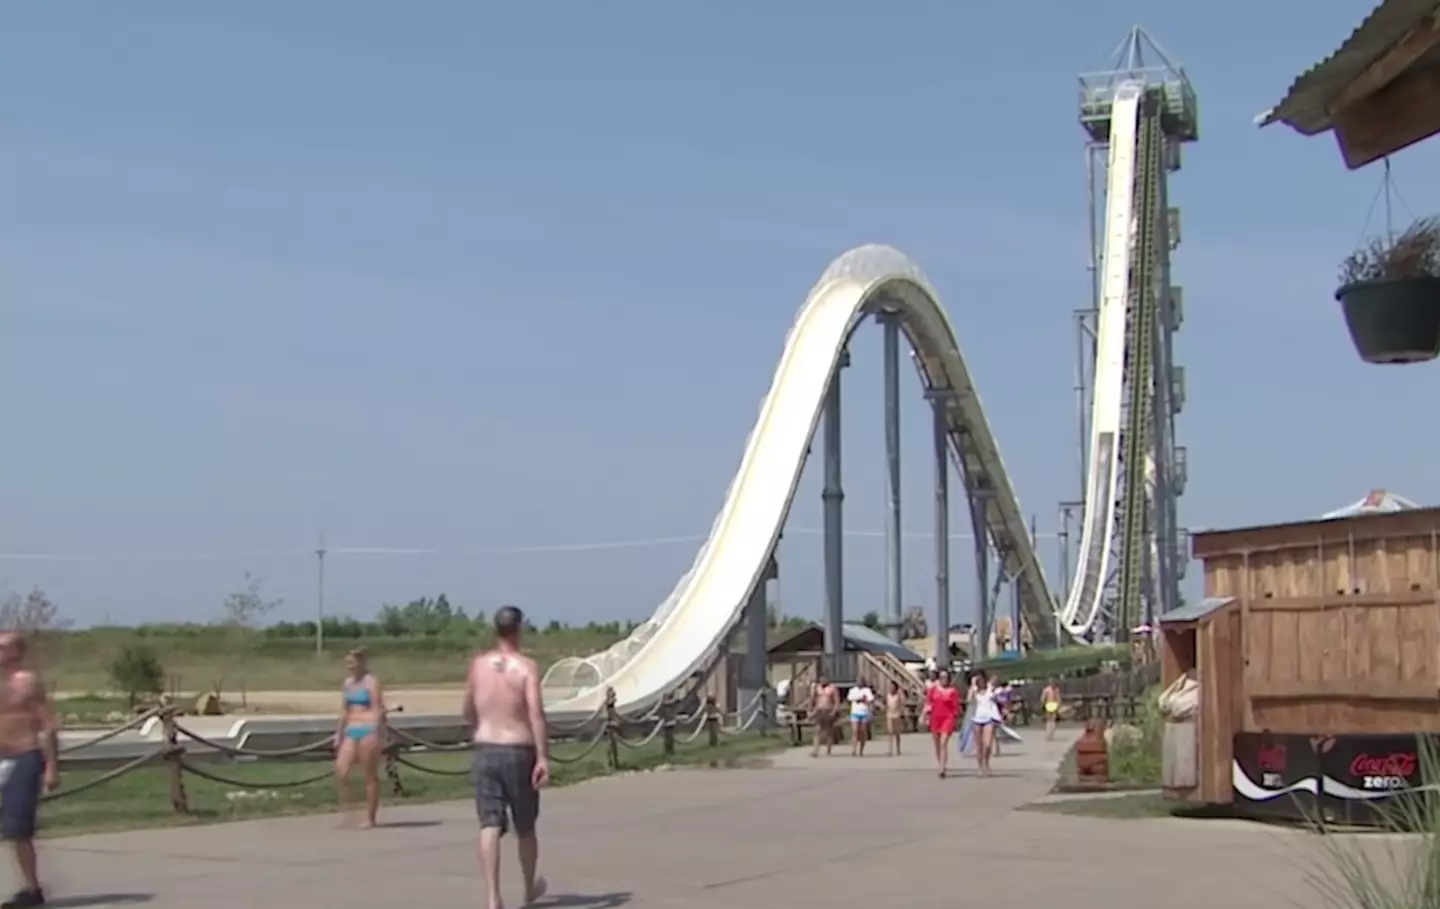 The Verrückt was the tallest waterslide in the world standing in at nearly a staggering 169 feet tall.